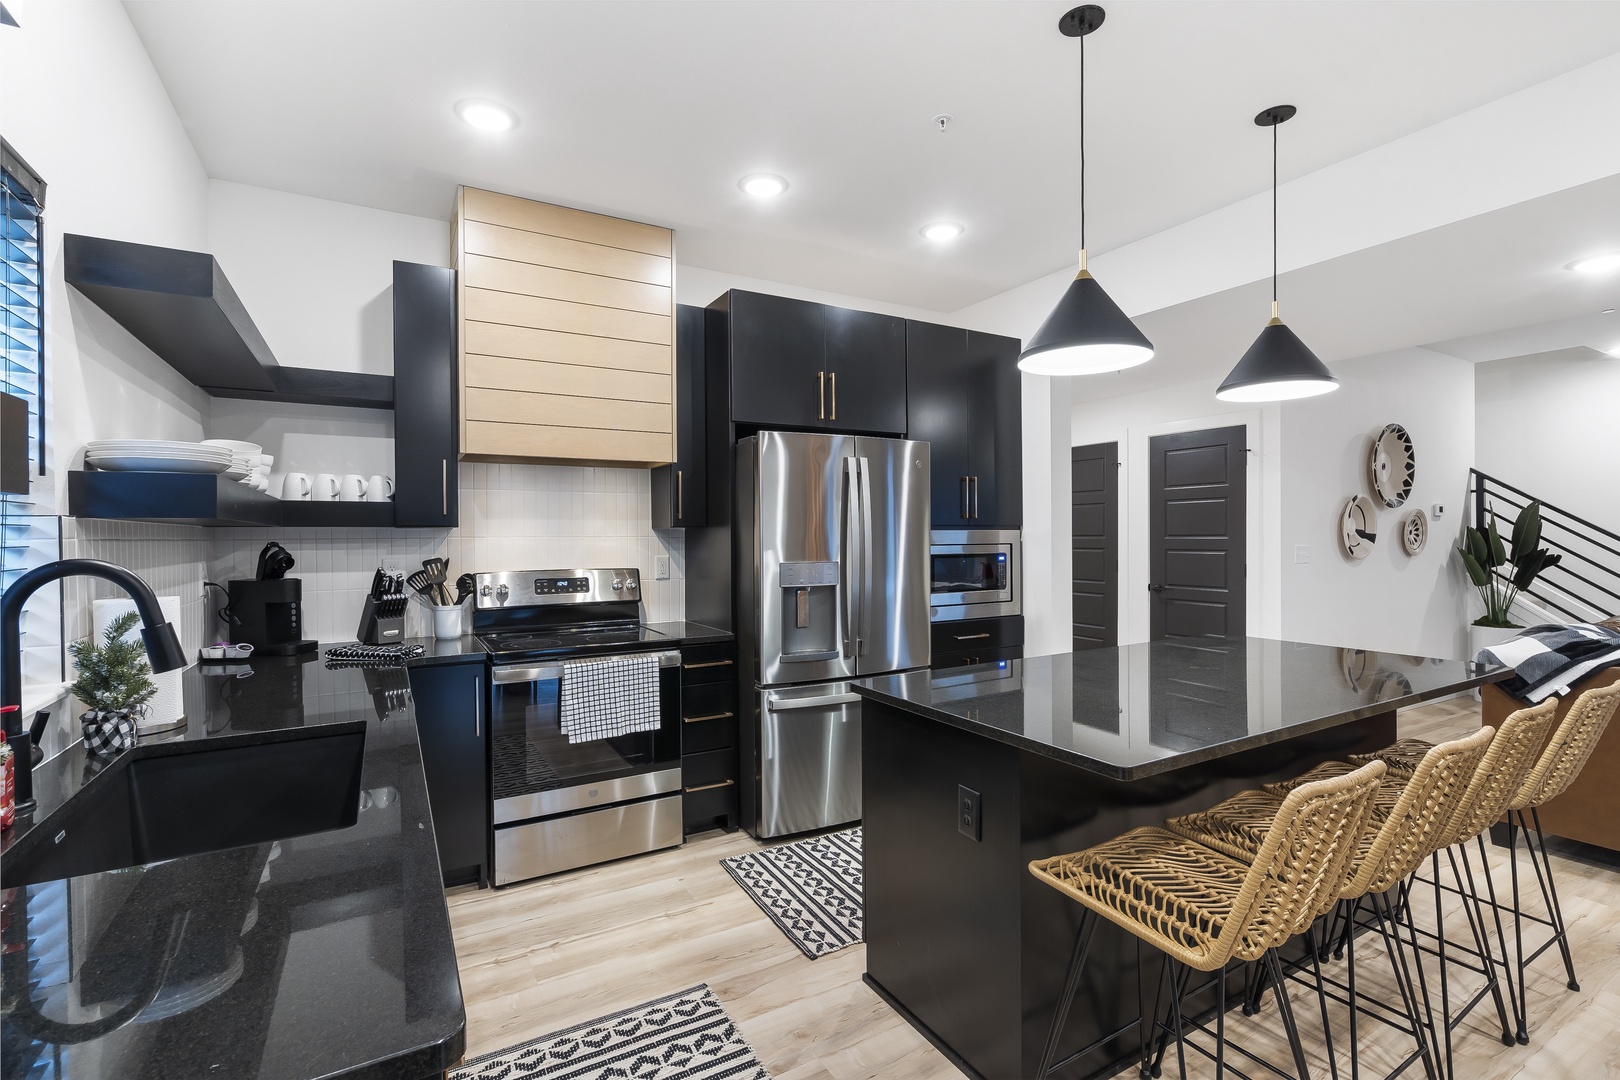 The stylish, spacious kitchen provides ample room and every home comfort